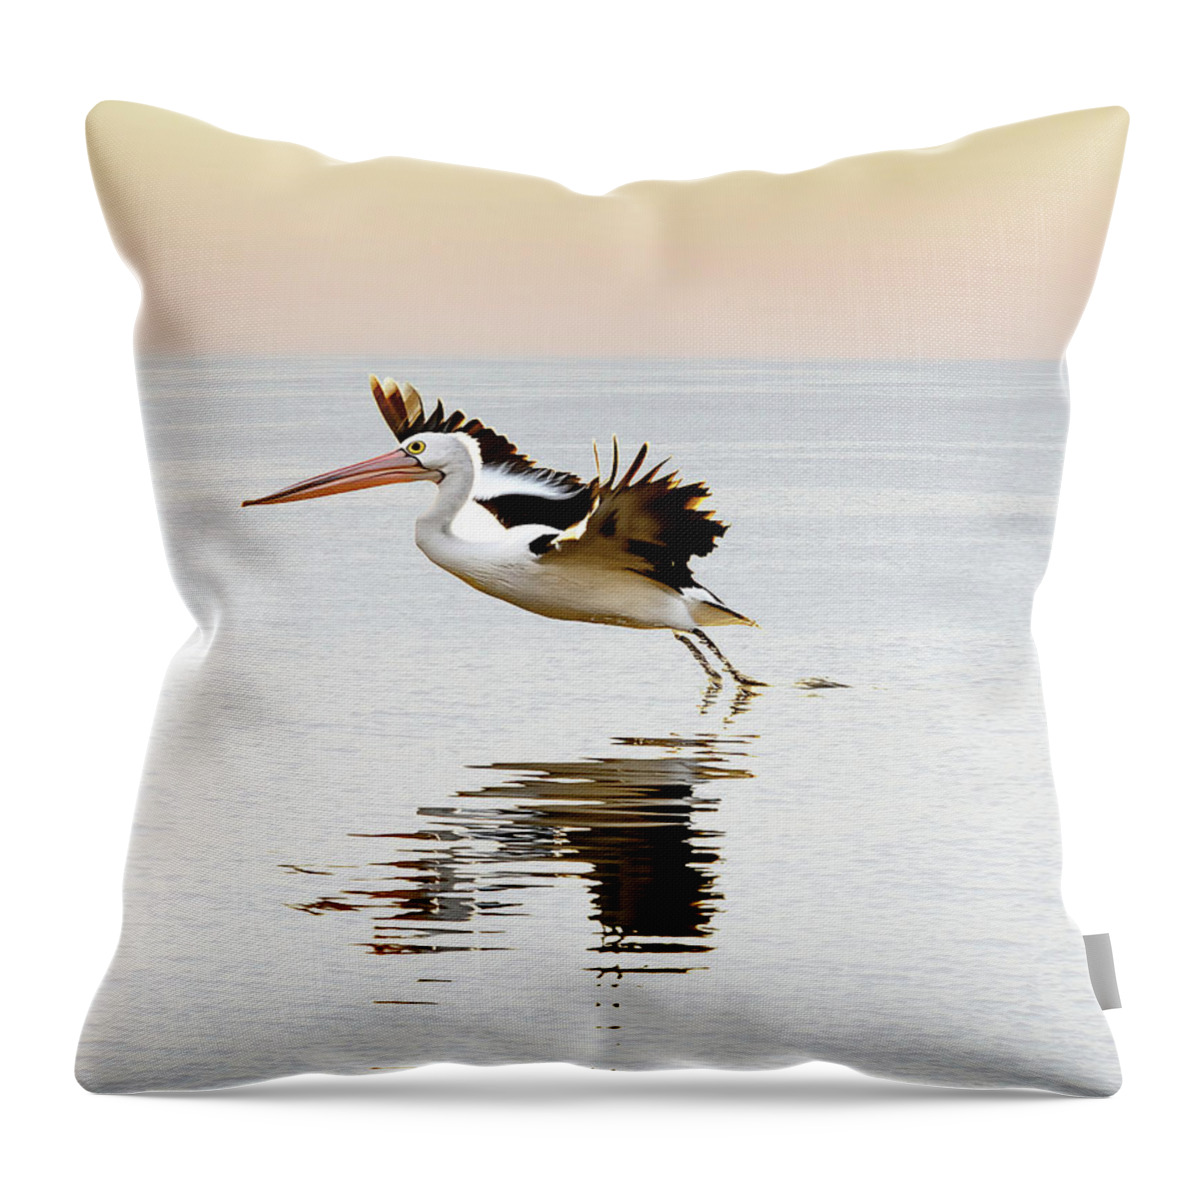 Three Pelicans Throw Pillow featuring the photograph Pelican Landing Triptych_2 by Az Jackson